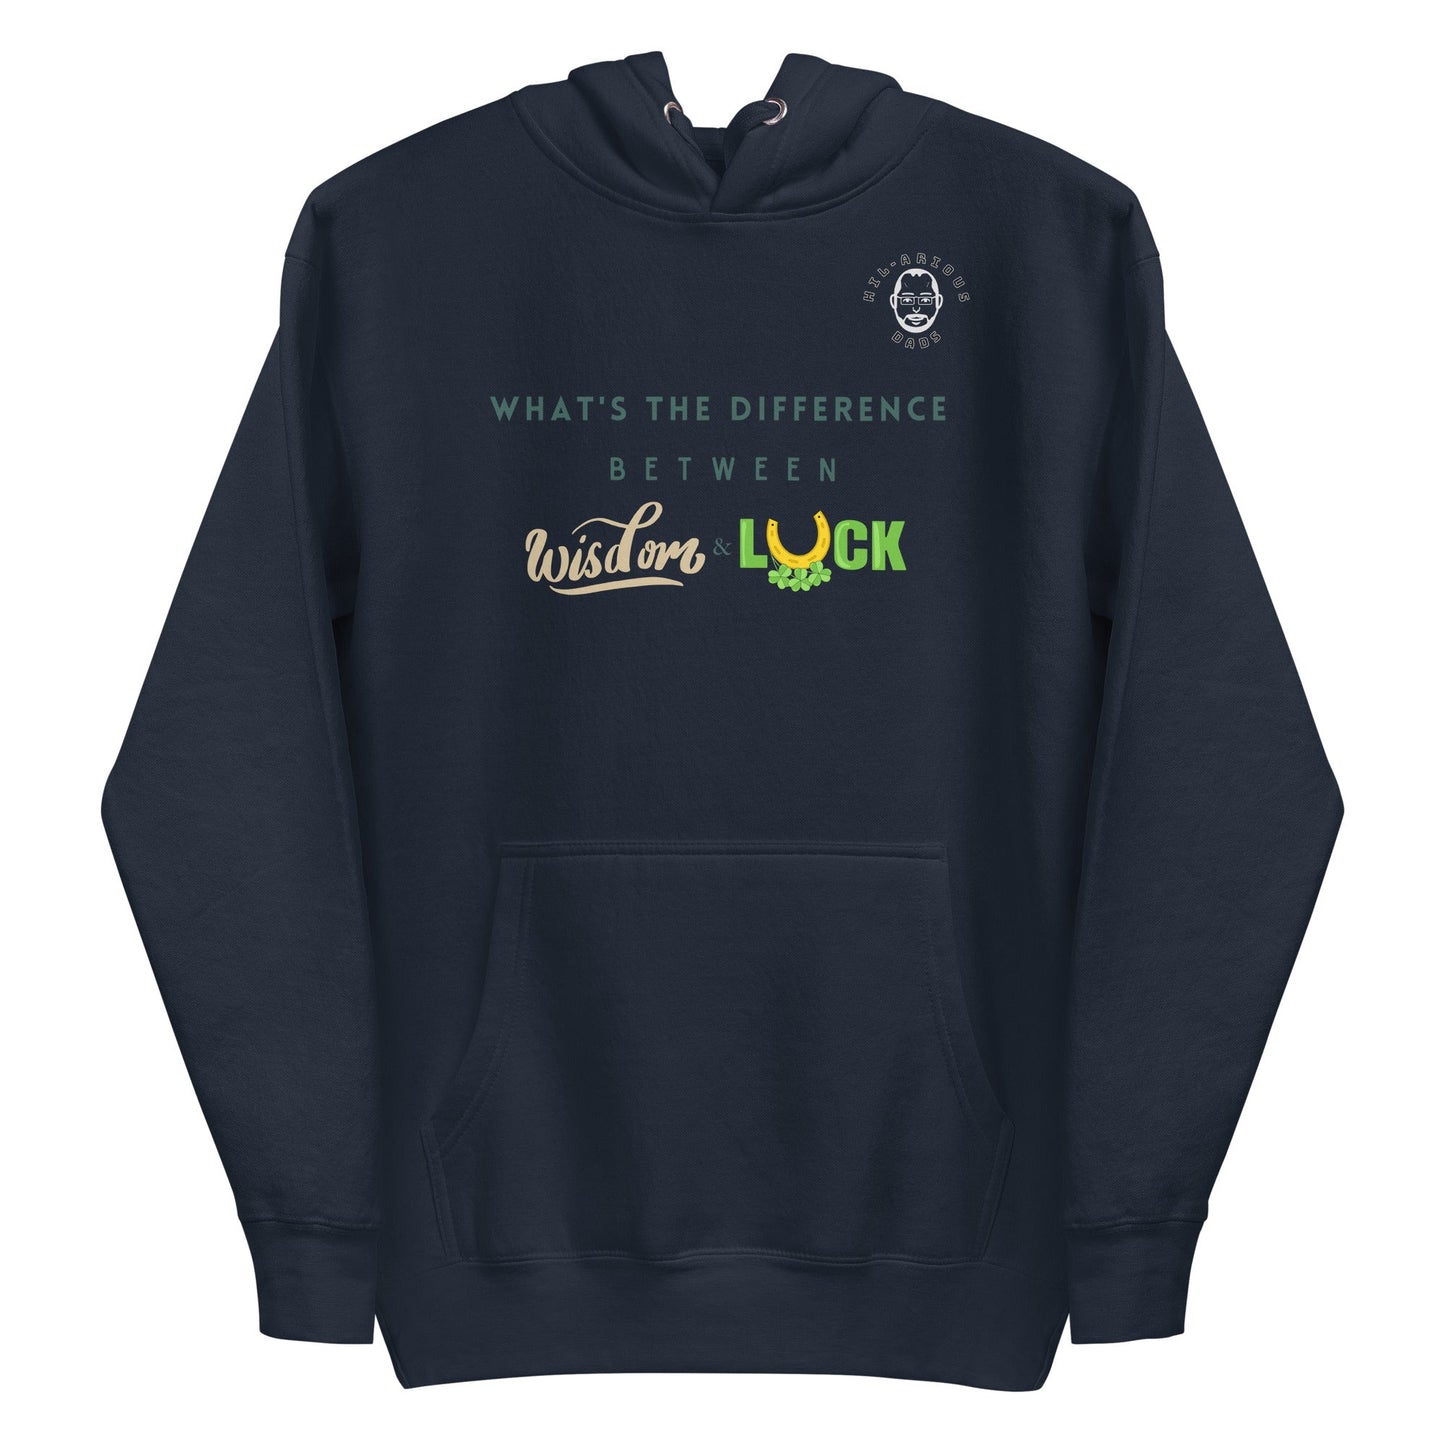 What's the difference between wisdom and luck?-Hoodie - Hil-arious Dads